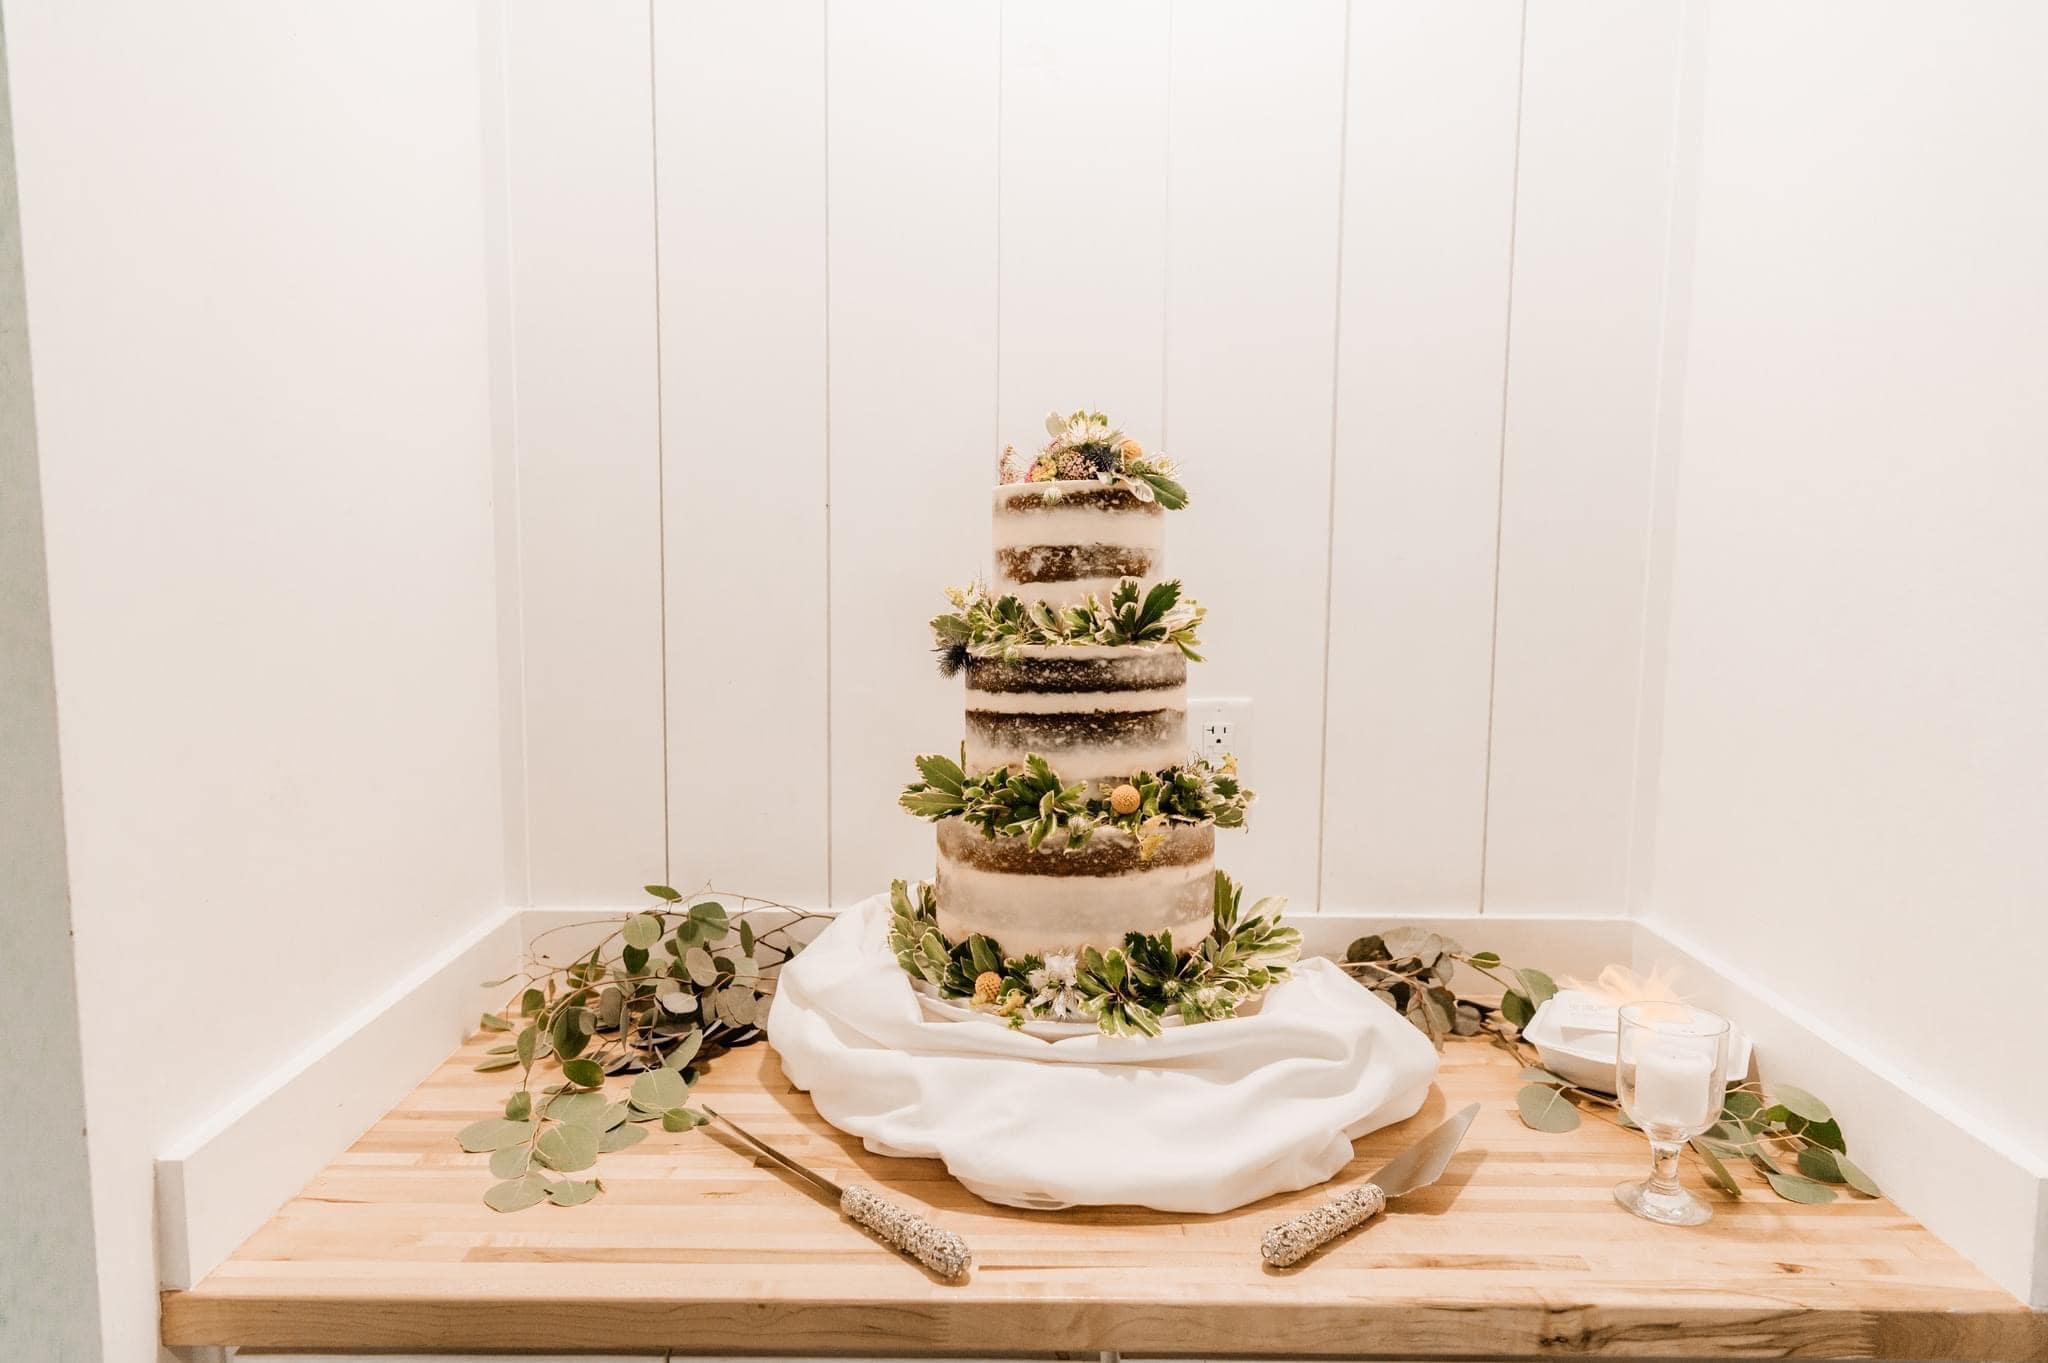 Multilayer wedding cake at the Ocean City Golf Club